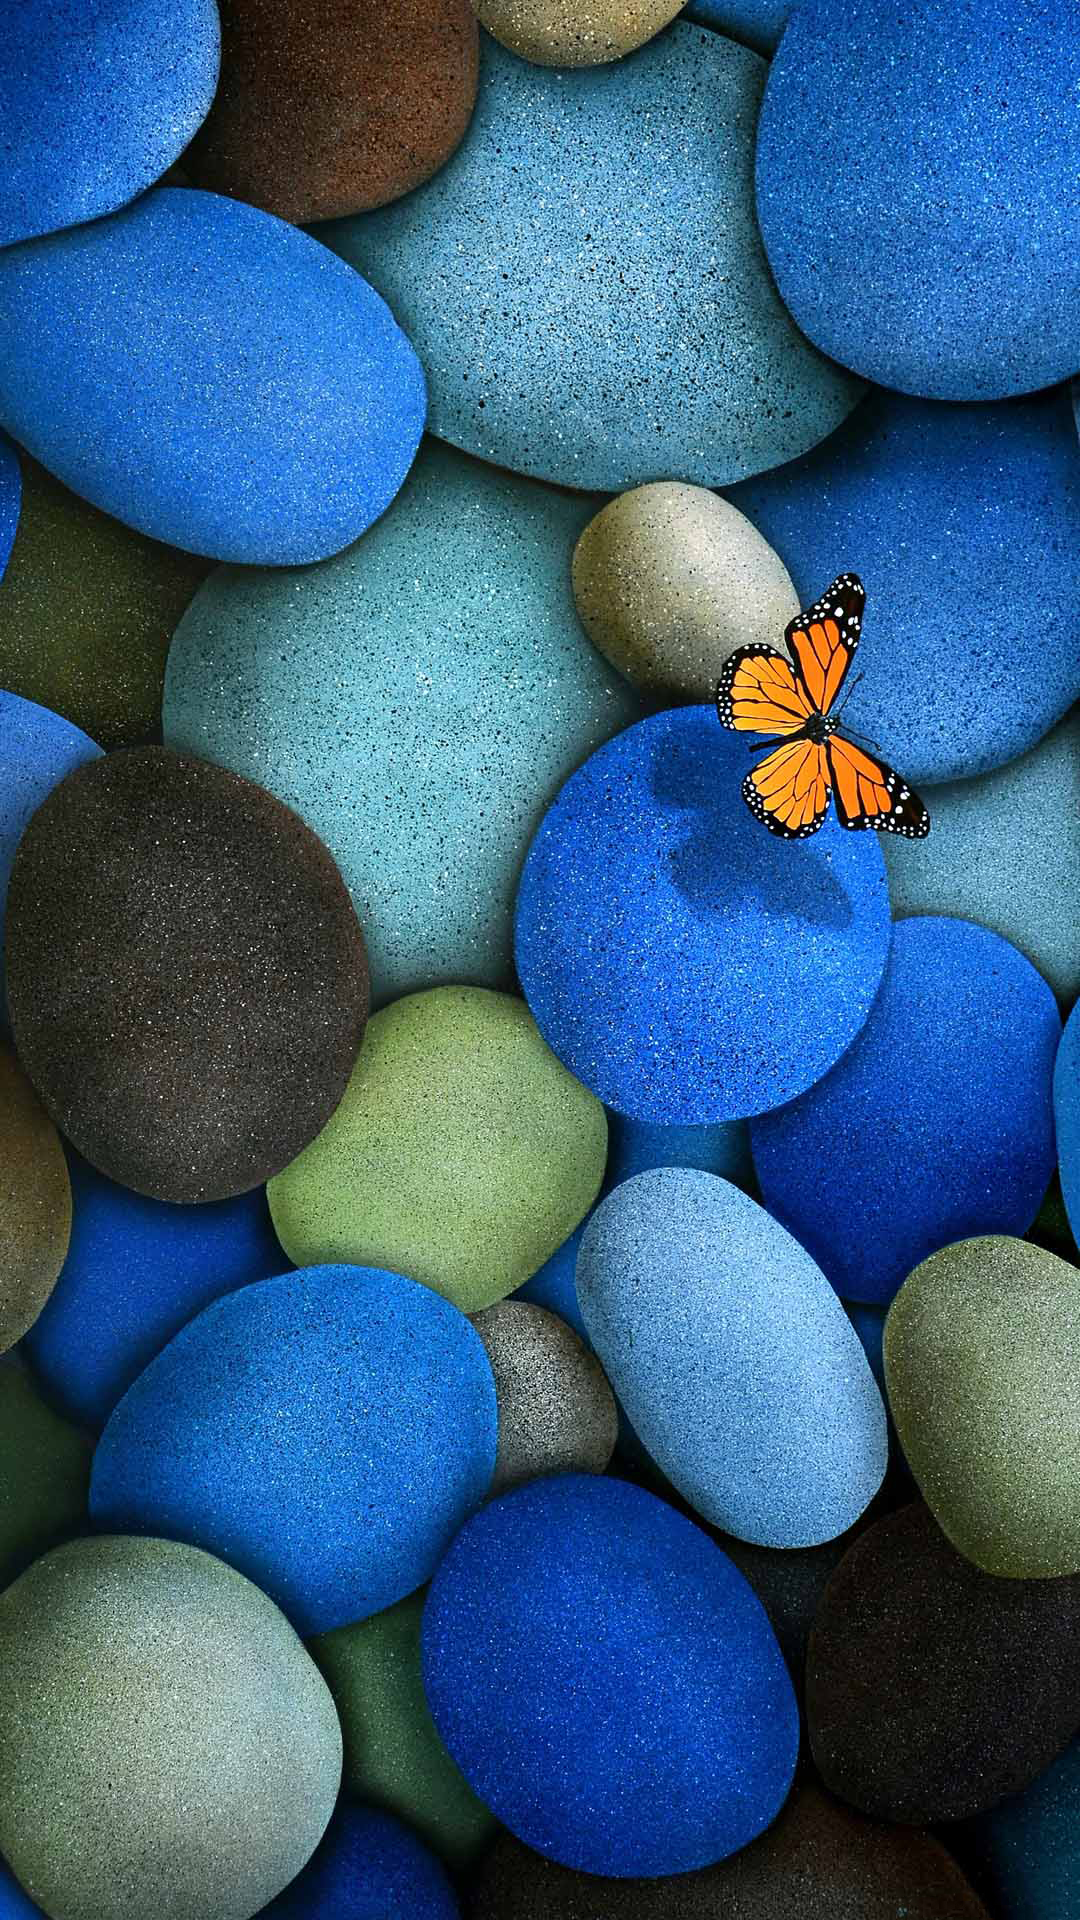 Butterfly For Android Wallpapers